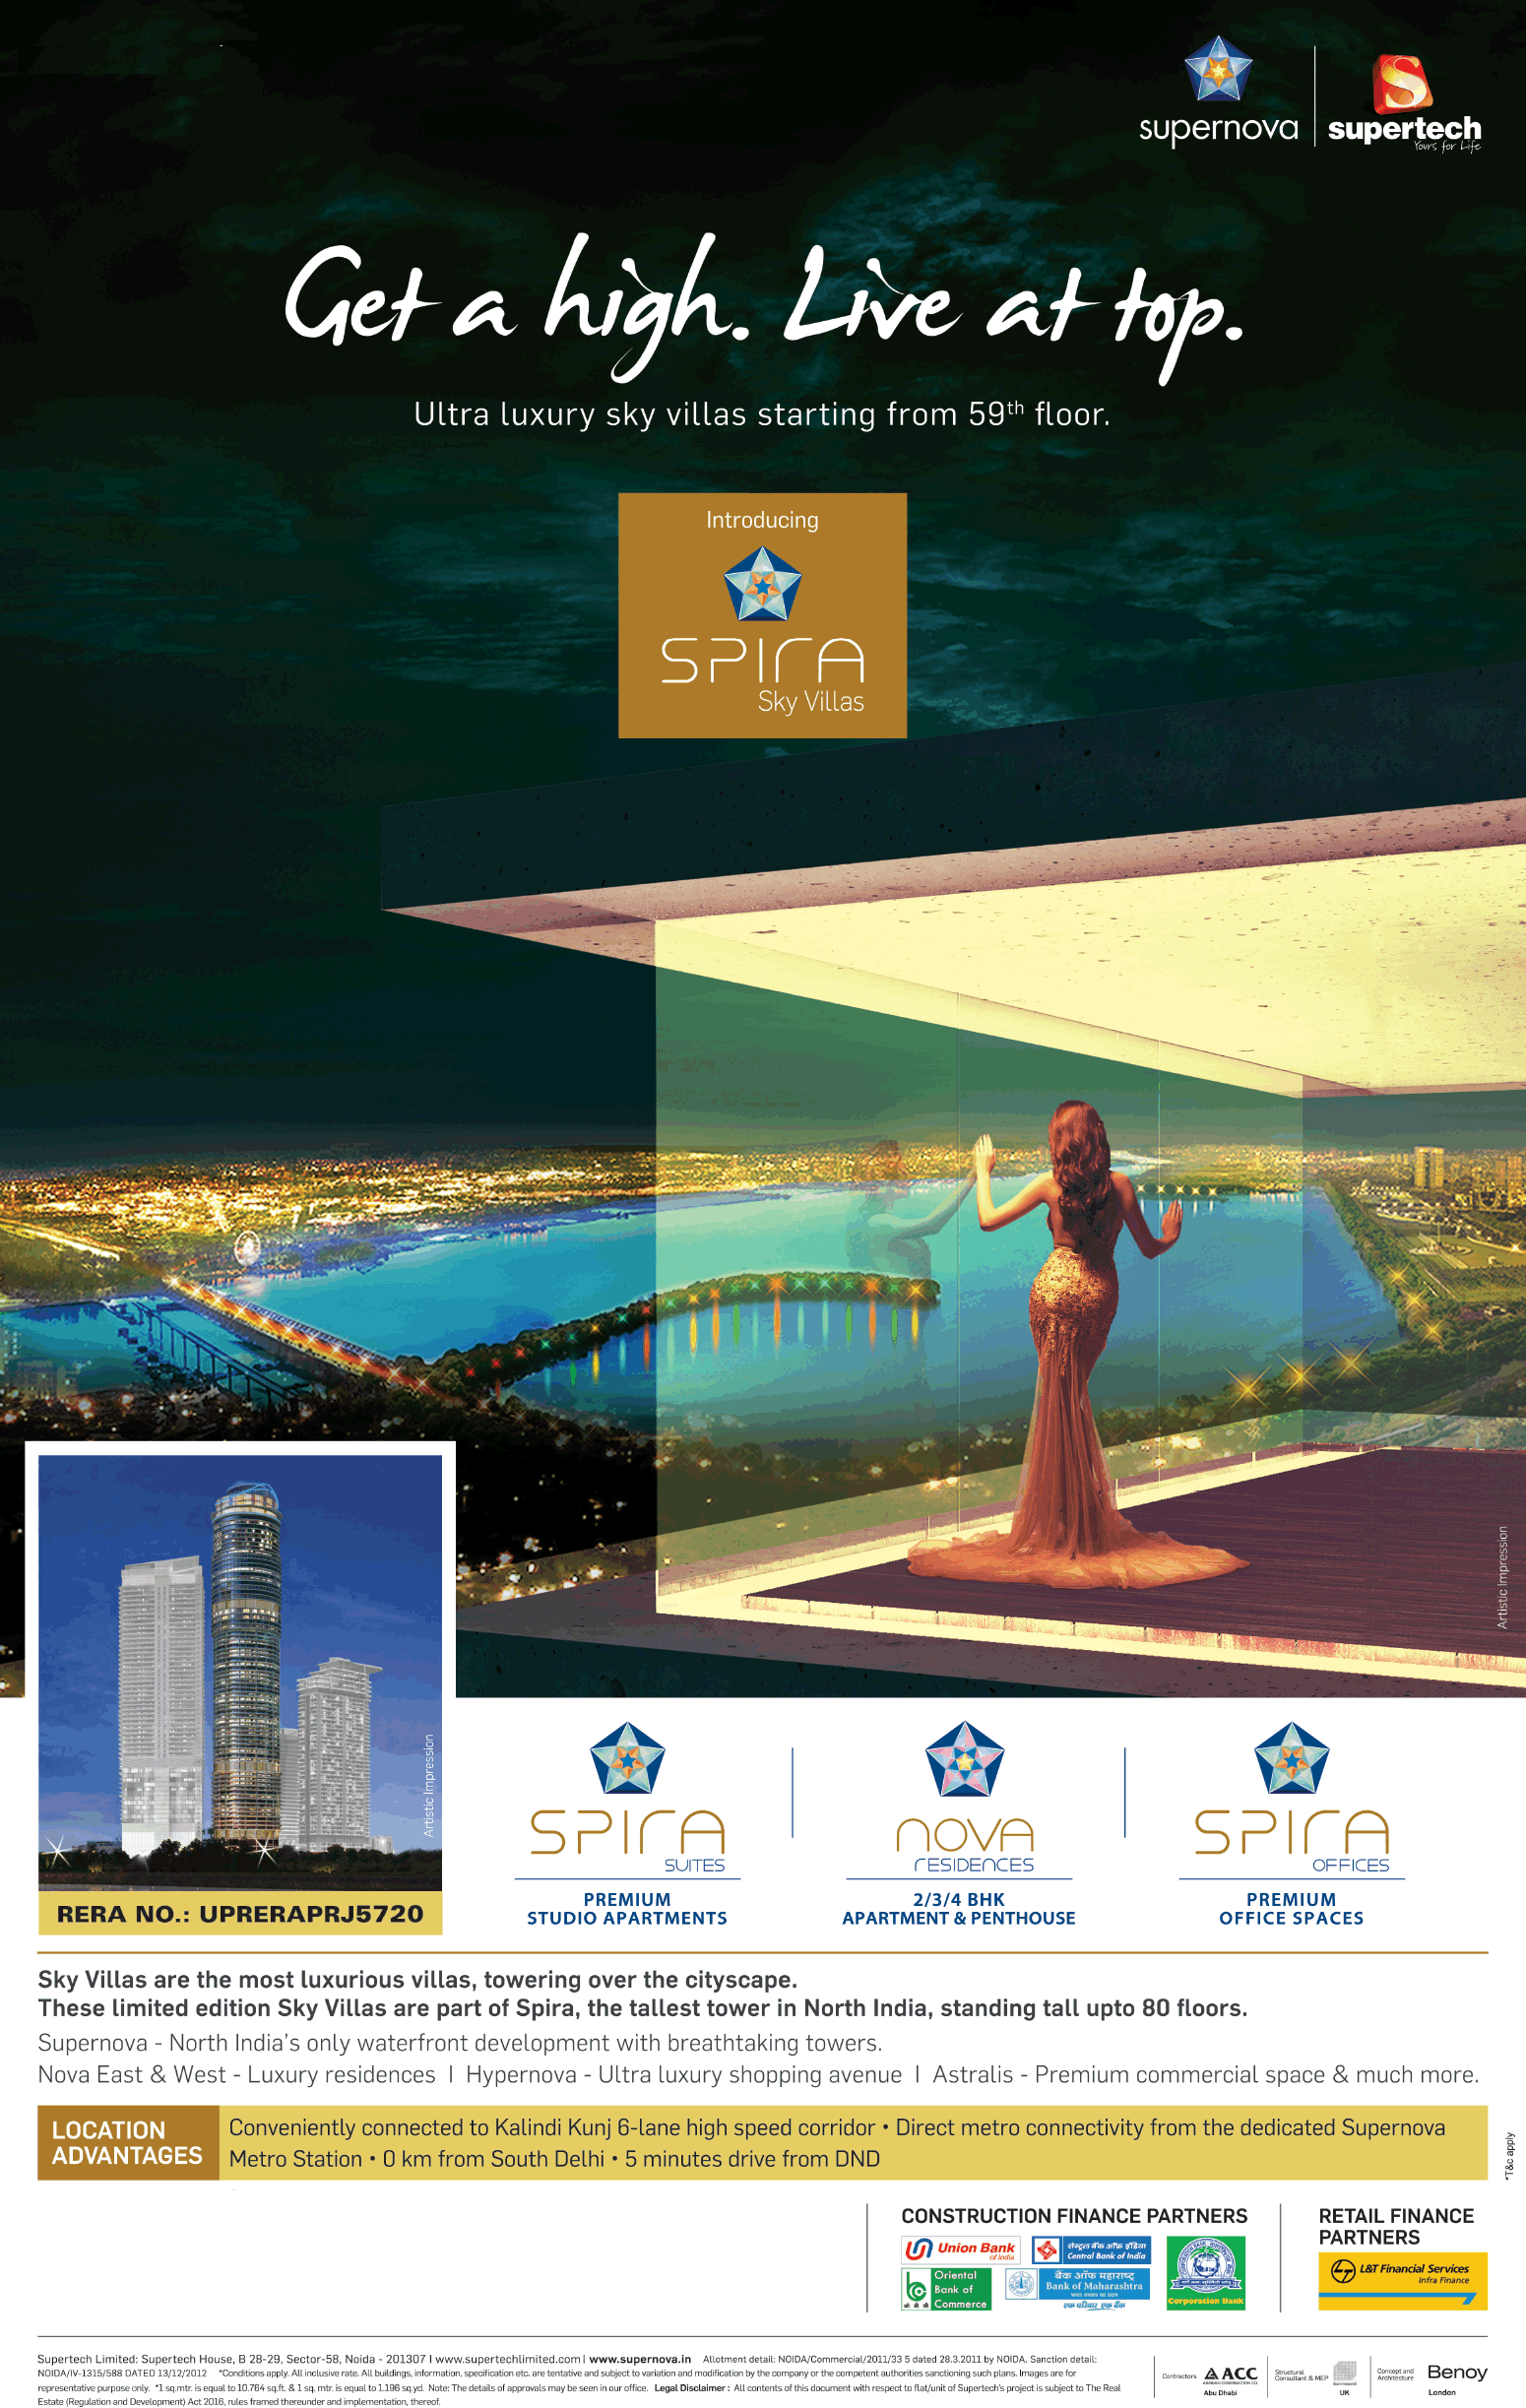 Get a high. live at top. ultra luxury sky villas starting from 59th floor. at Supertech Supernova, Noida Update